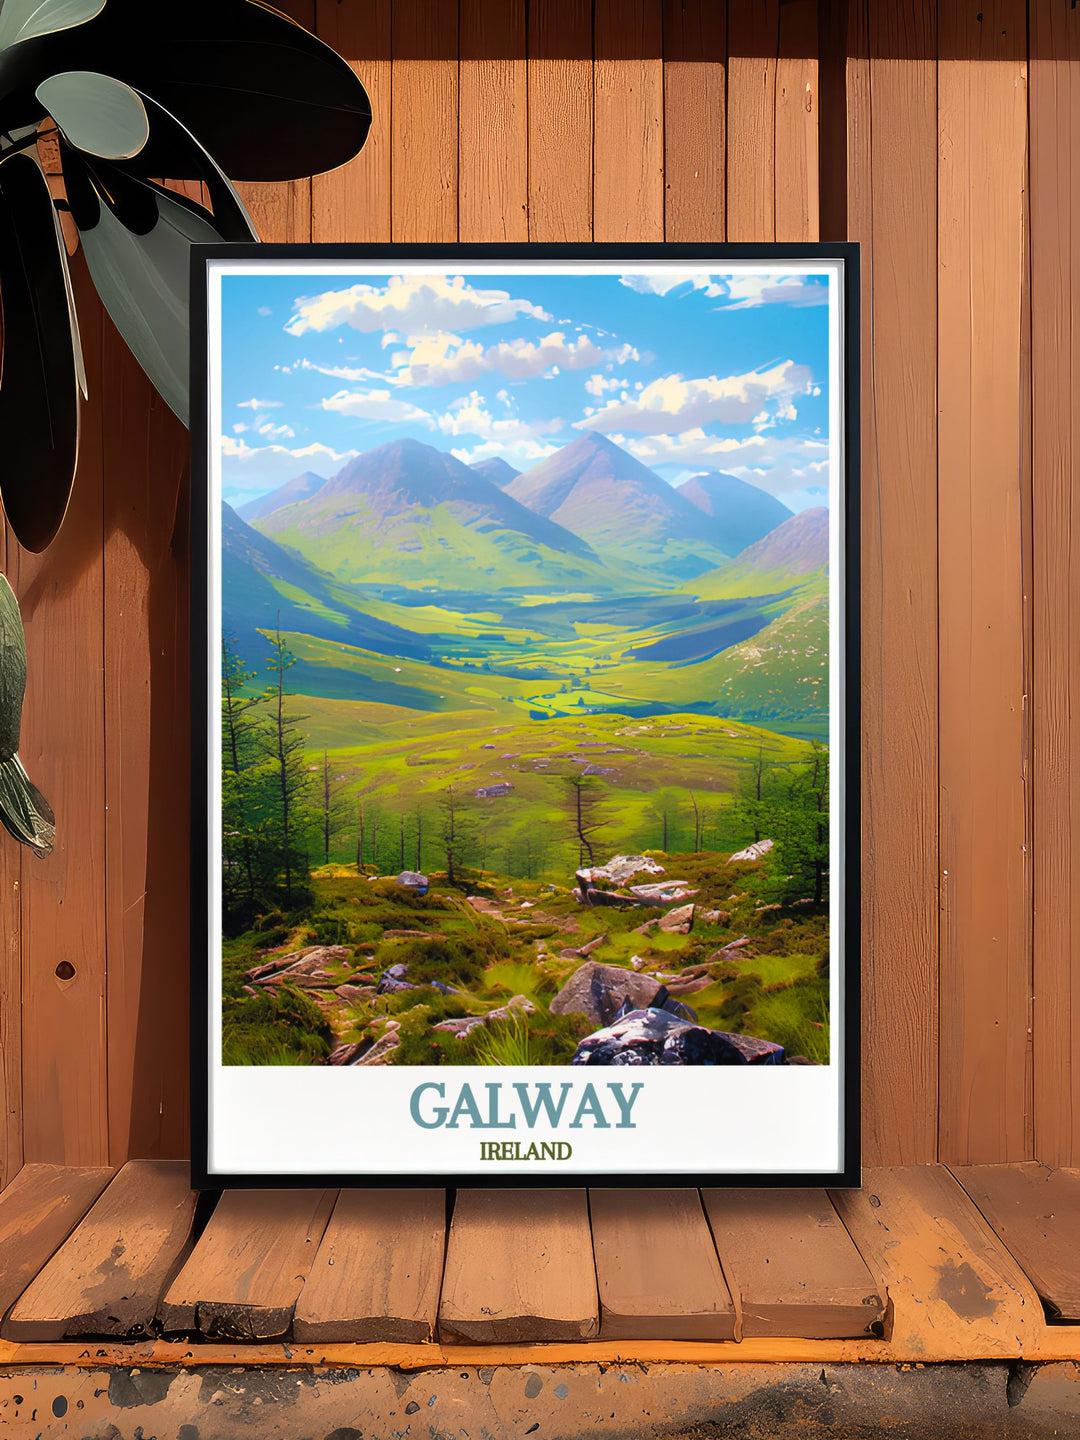 Bring the enchanting scenery of Galway and Connemara into your living space with this beautifully crafted poster. The artwork highlights the historical and natural landmarks of the region, making it a perfect gift for travelers and art lovers alike.